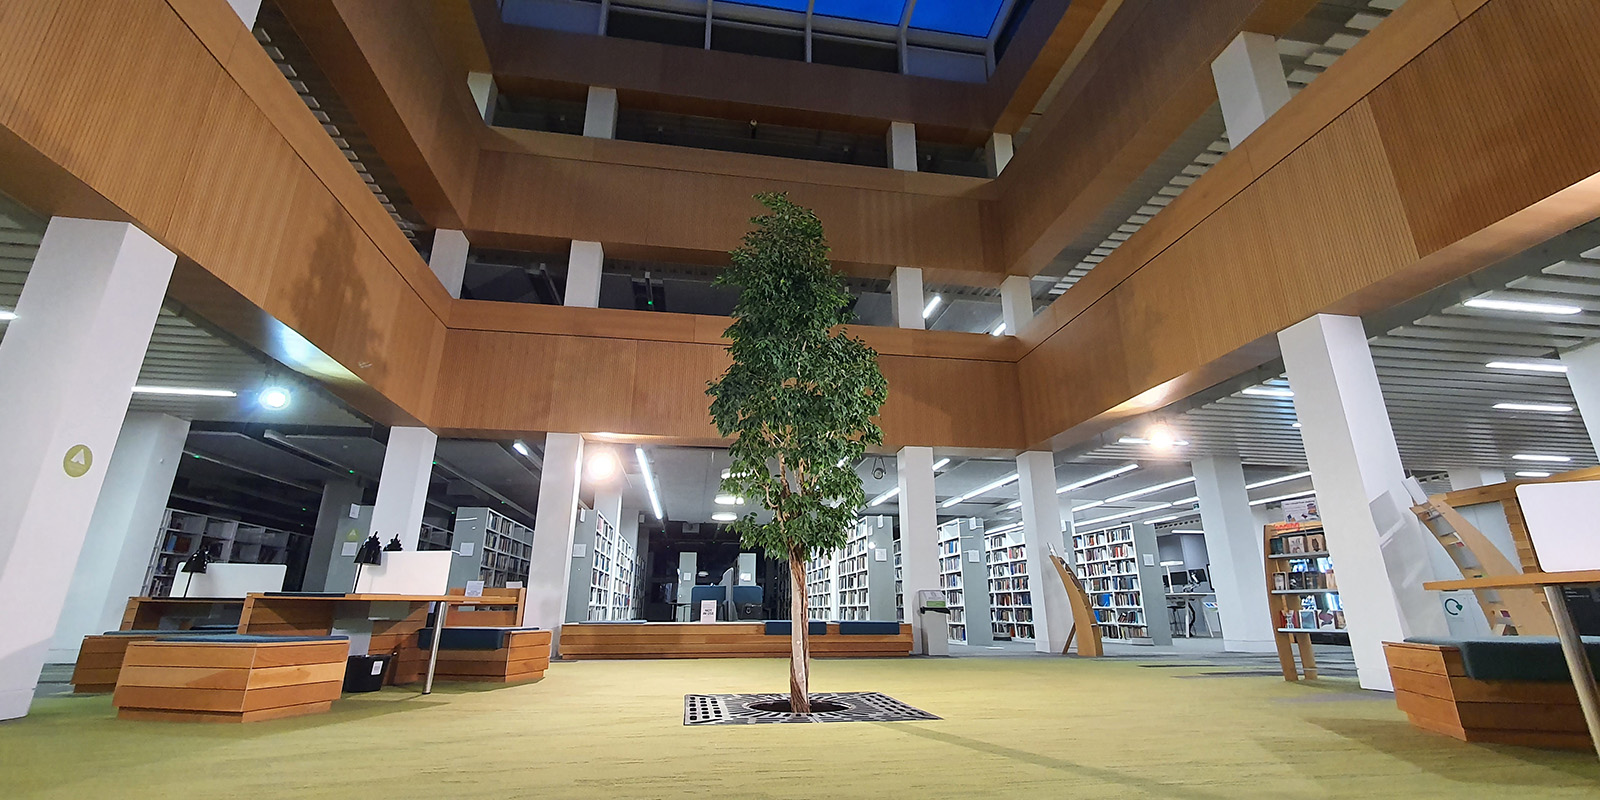 СʪƵ library foyer with the living tree in the centre.